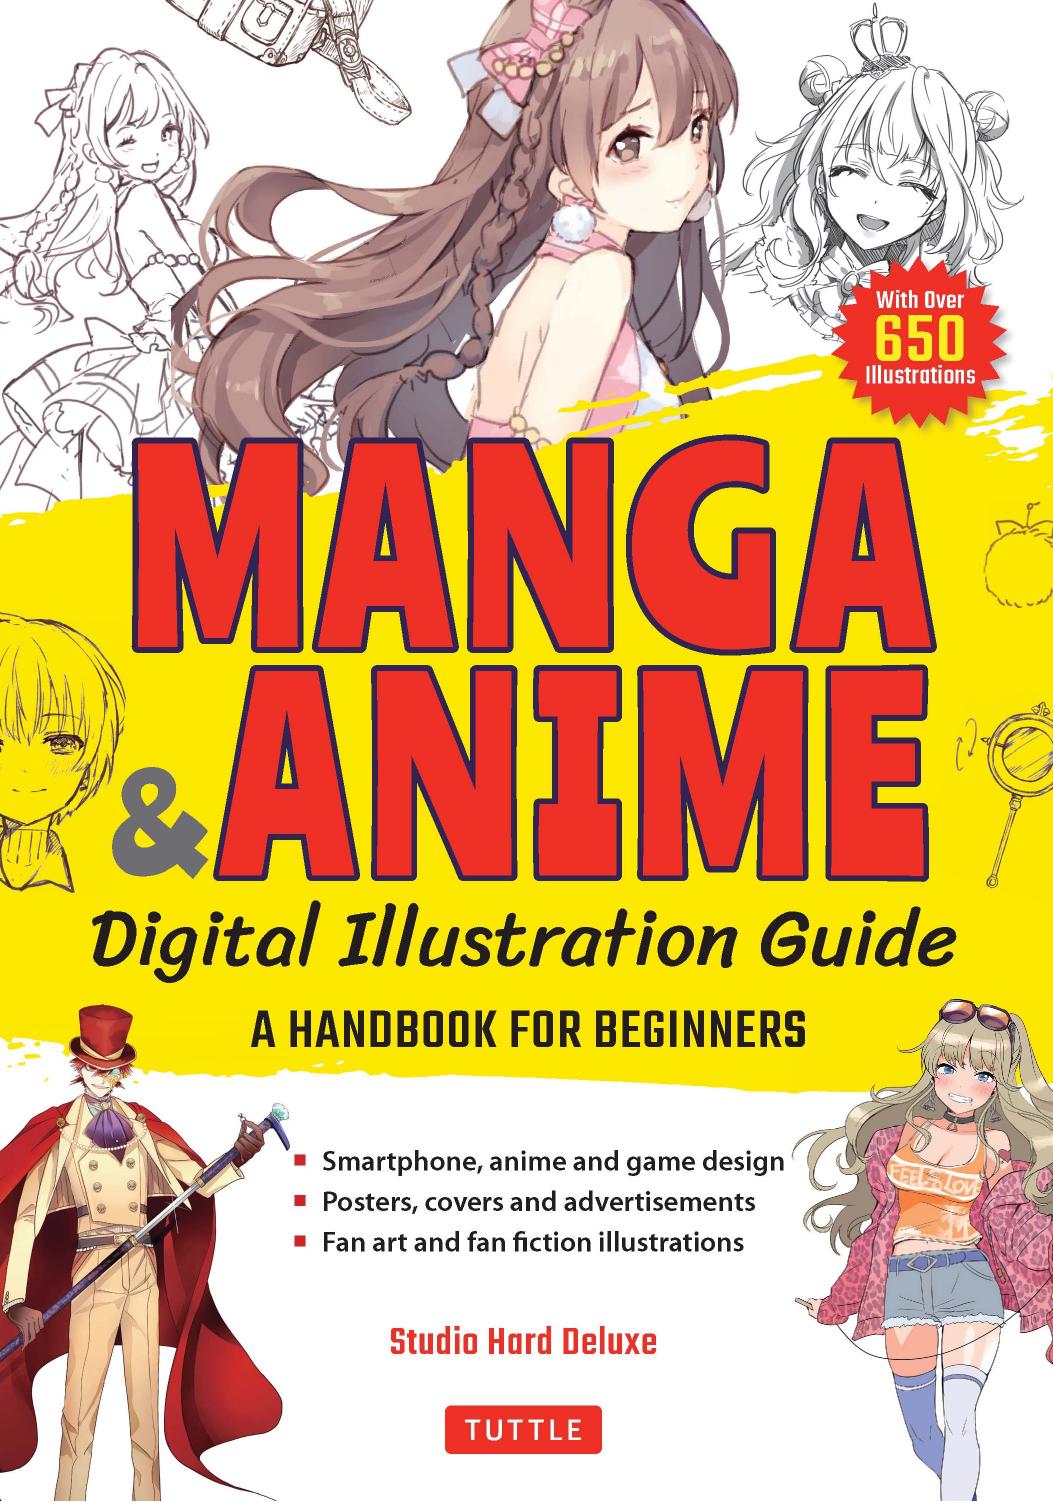 Manga & Anime Digital Illustration Guide: A Handbook for Beginners (with over 650 illustrations) by Studio Hard Deluxe